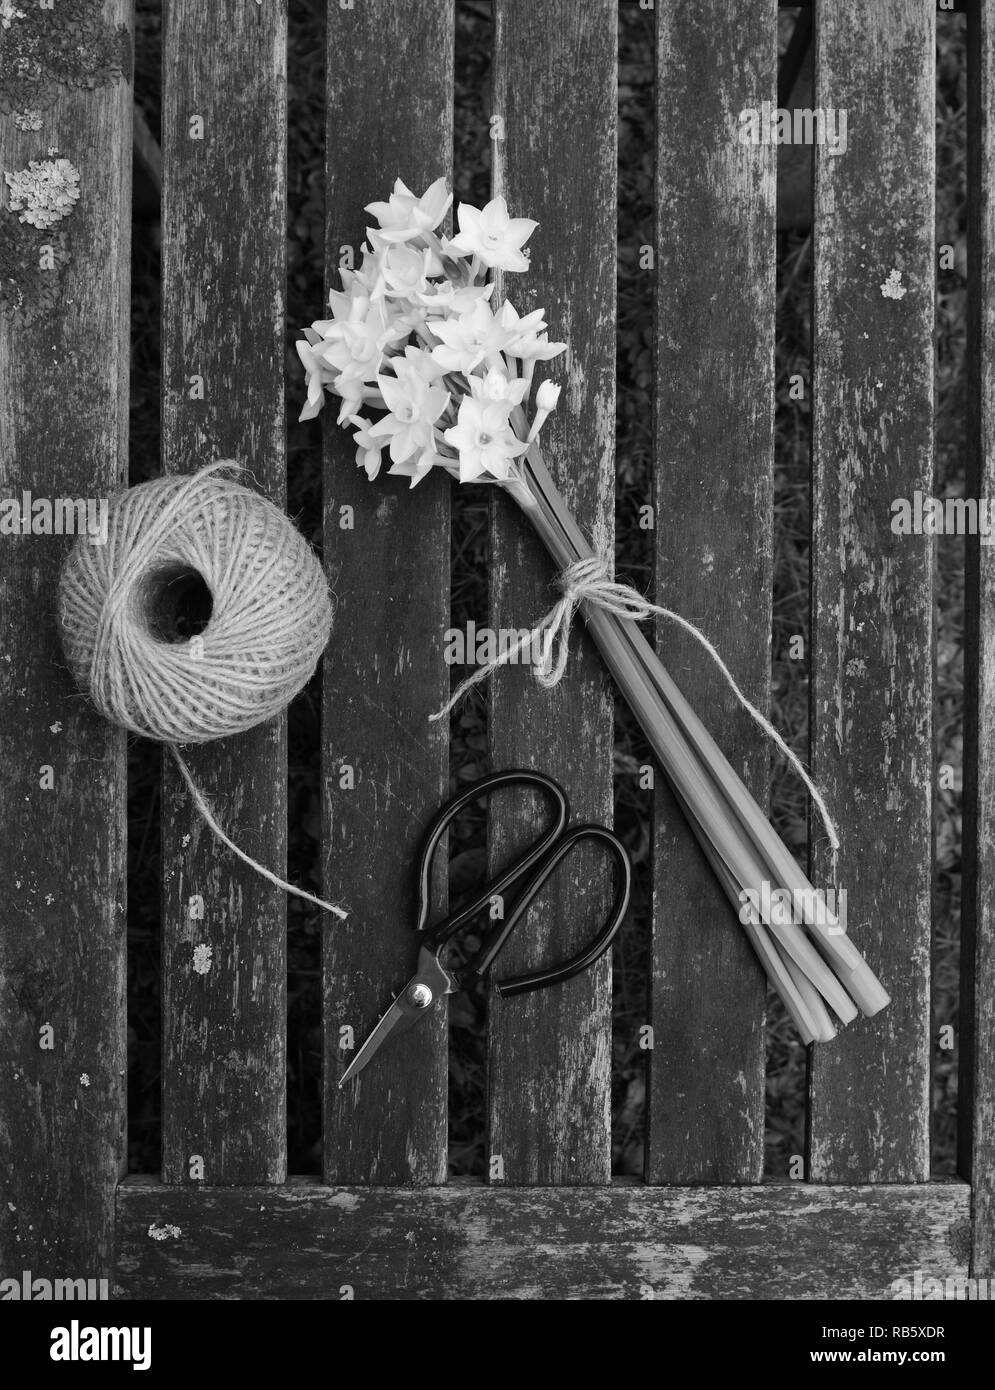 Narcissi flowers tied with twine, with a ball of garden string and scissors on a wooden slat background - monochrome processing Stock Photo